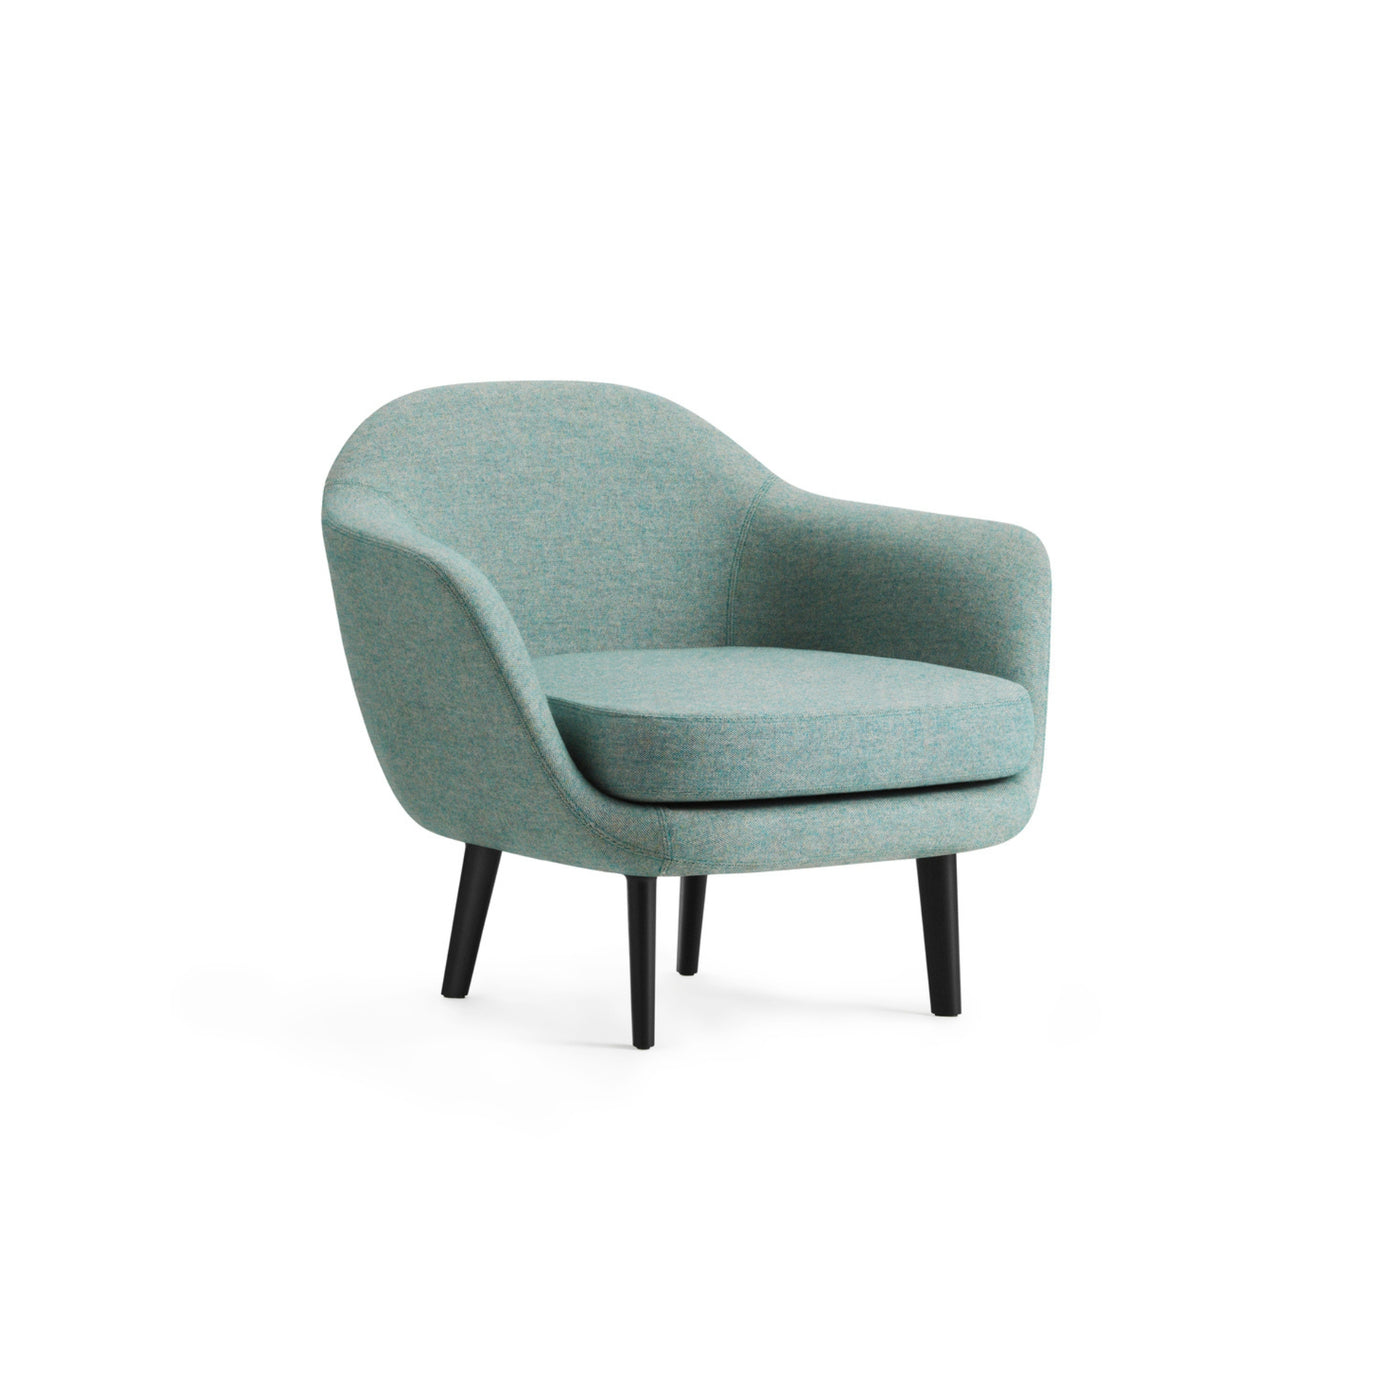 Normann Copenhagen Sum Armchair. Made to order at someday designs. #colour_main-line-flax-bayswater